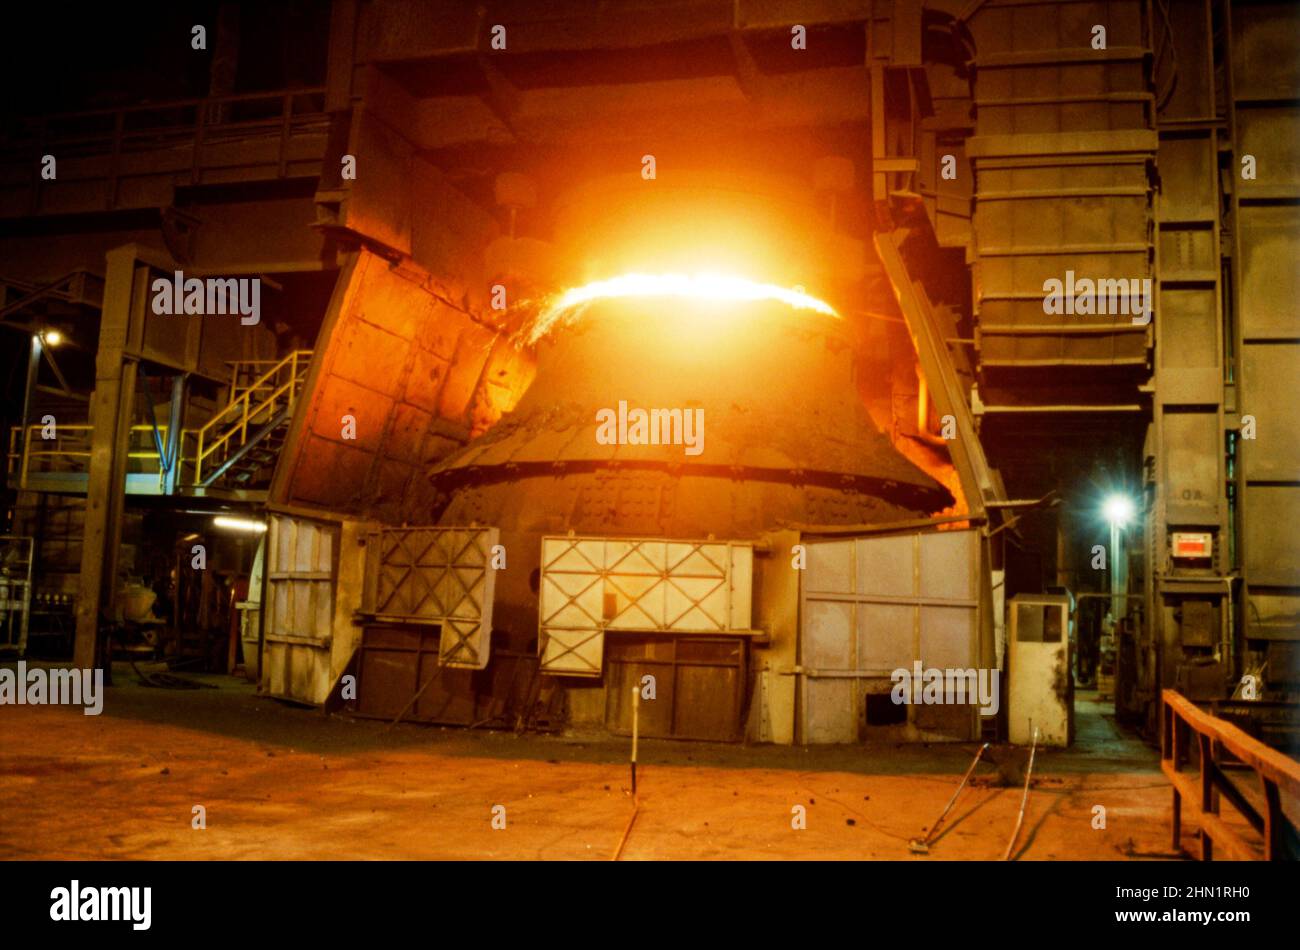 A mid-1980s view inside the Port Talbot Steelworks, an integrated steel production plant in Port Talbot, West Glamorgan, Wales, UK. Here one of the giant furnaces is powered by coal. This image is from a vintage colour transparency taken by a visiting photographer – a vintage 1980s photograph. Stock Photo